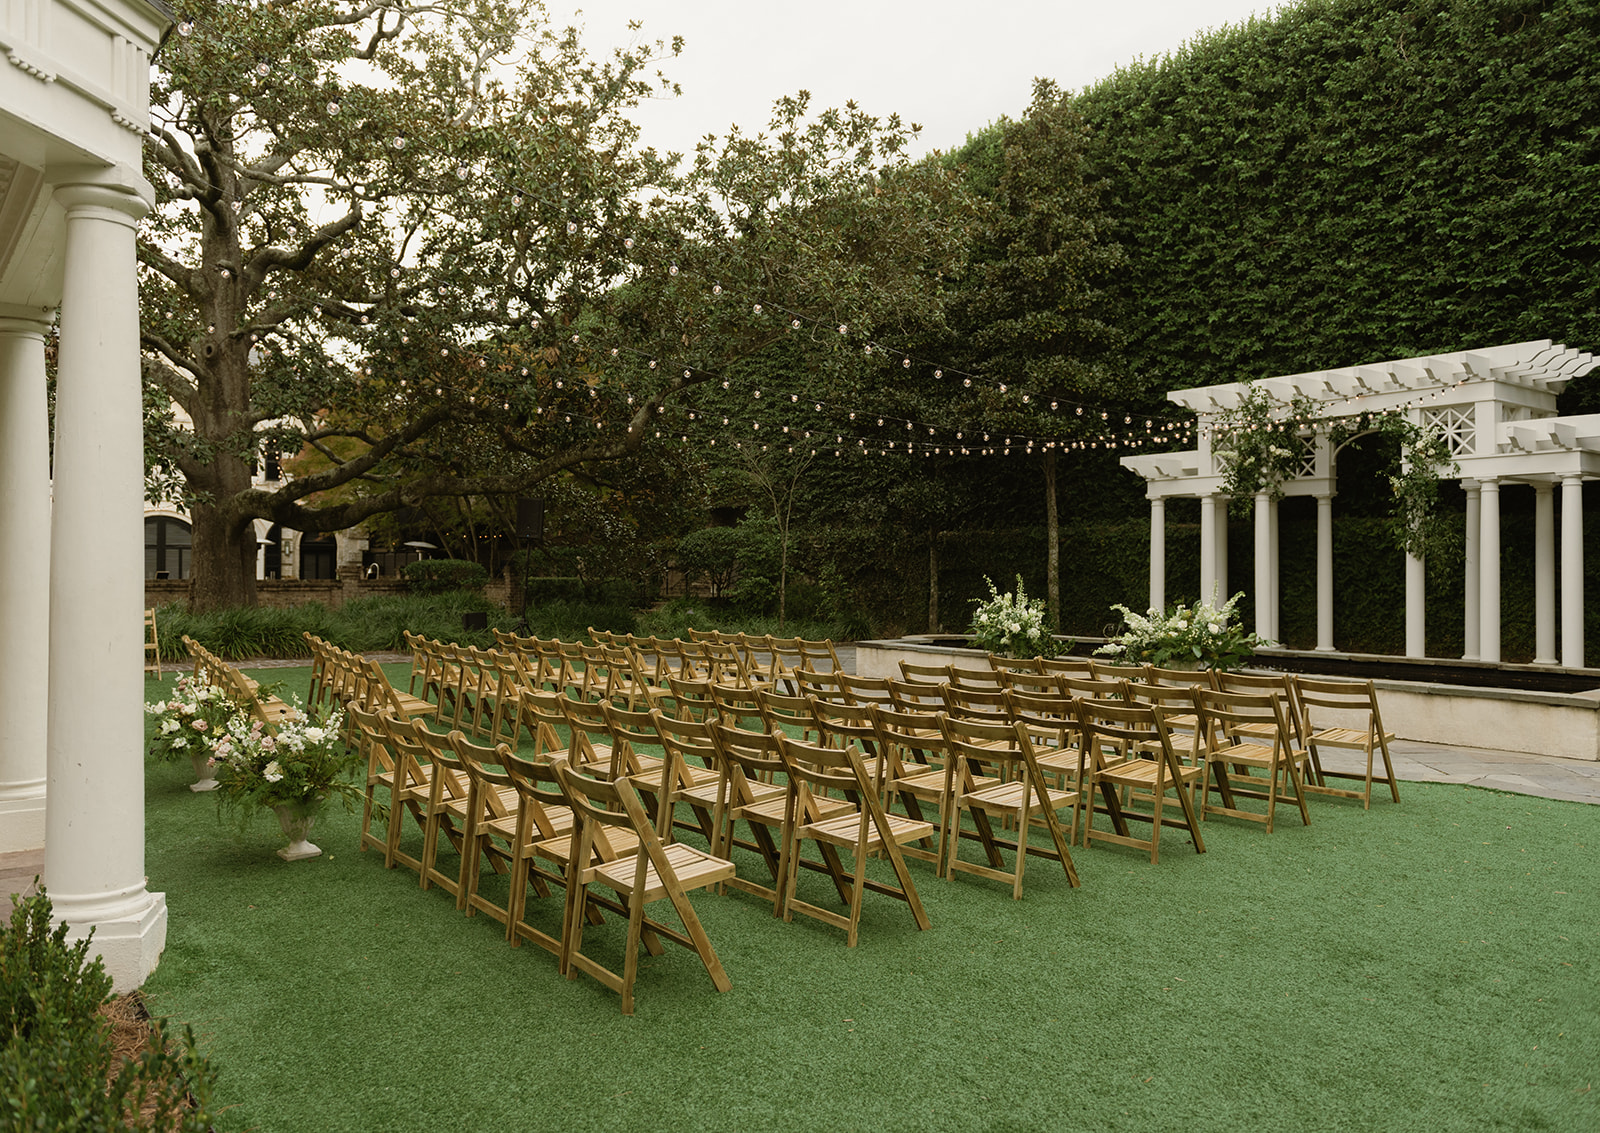 Planning and design by PPHG Peninsula Events